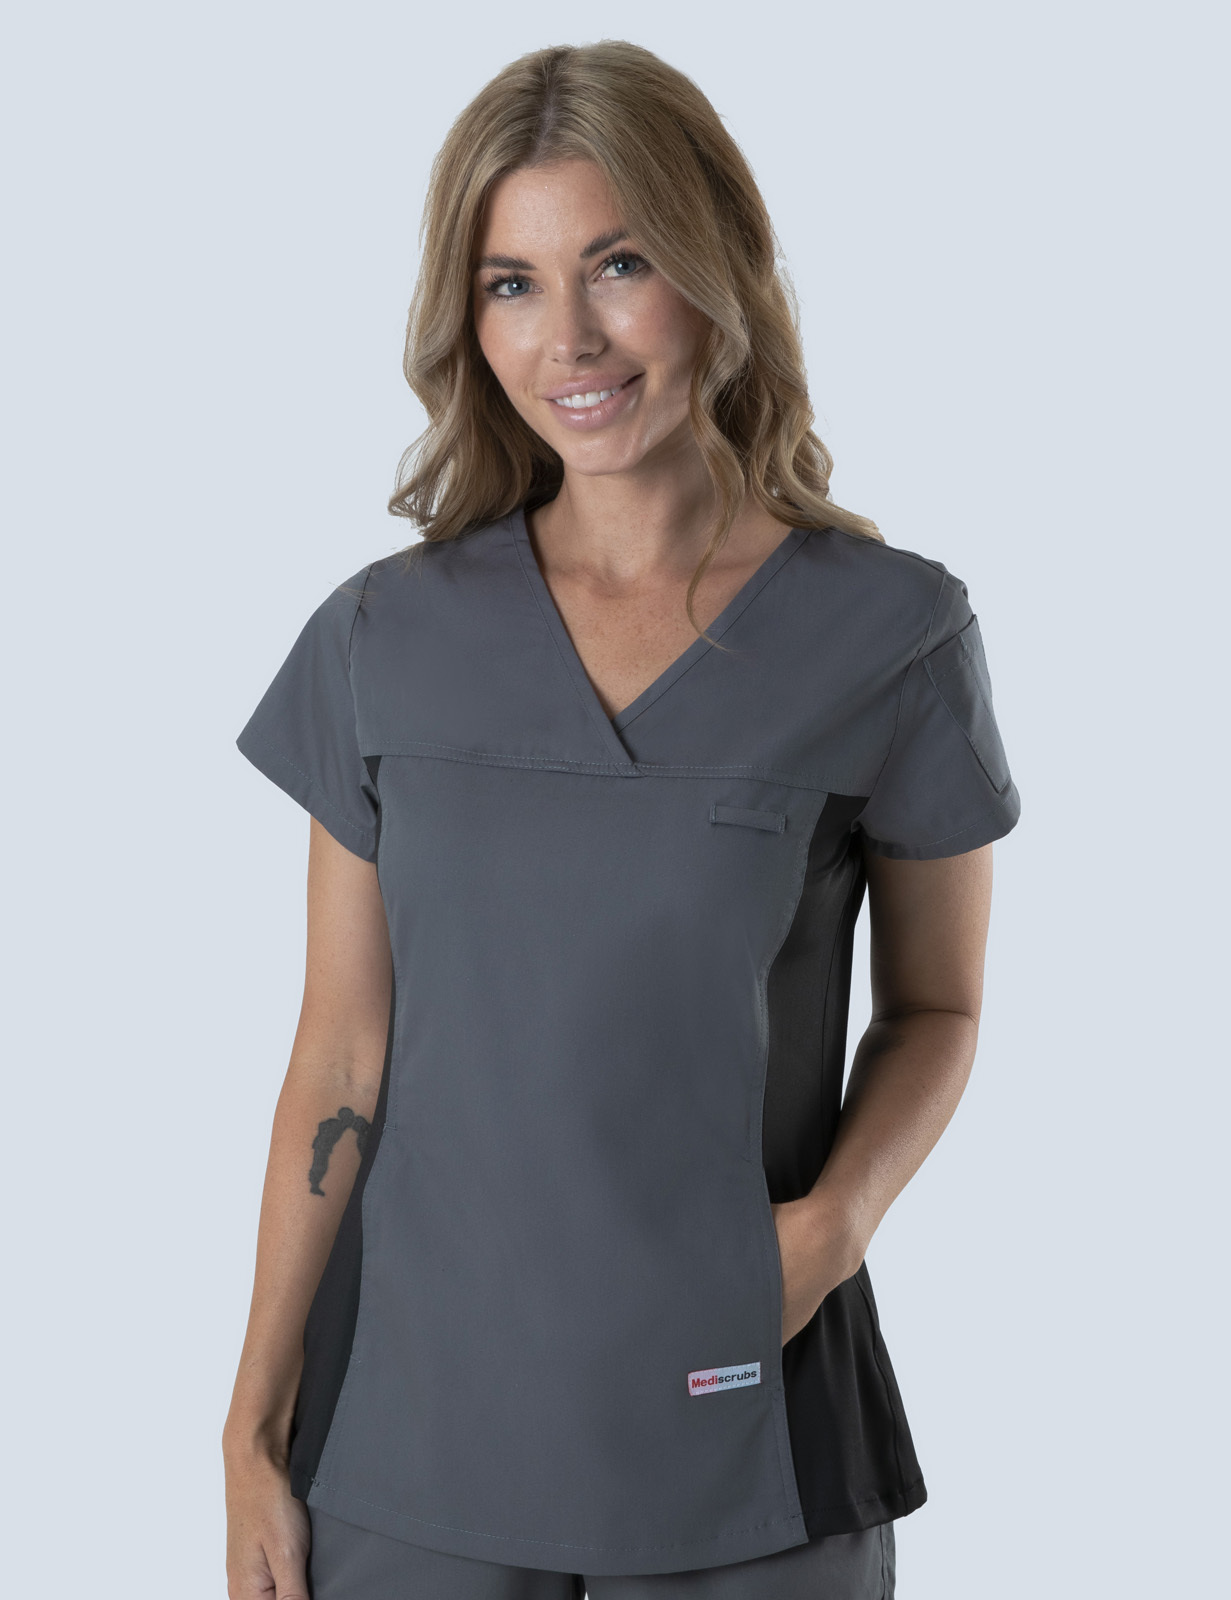 Pathology North - Coffs Harbour (Women's Fit Spandex Scrub Top in Steel Grey incl Logos)